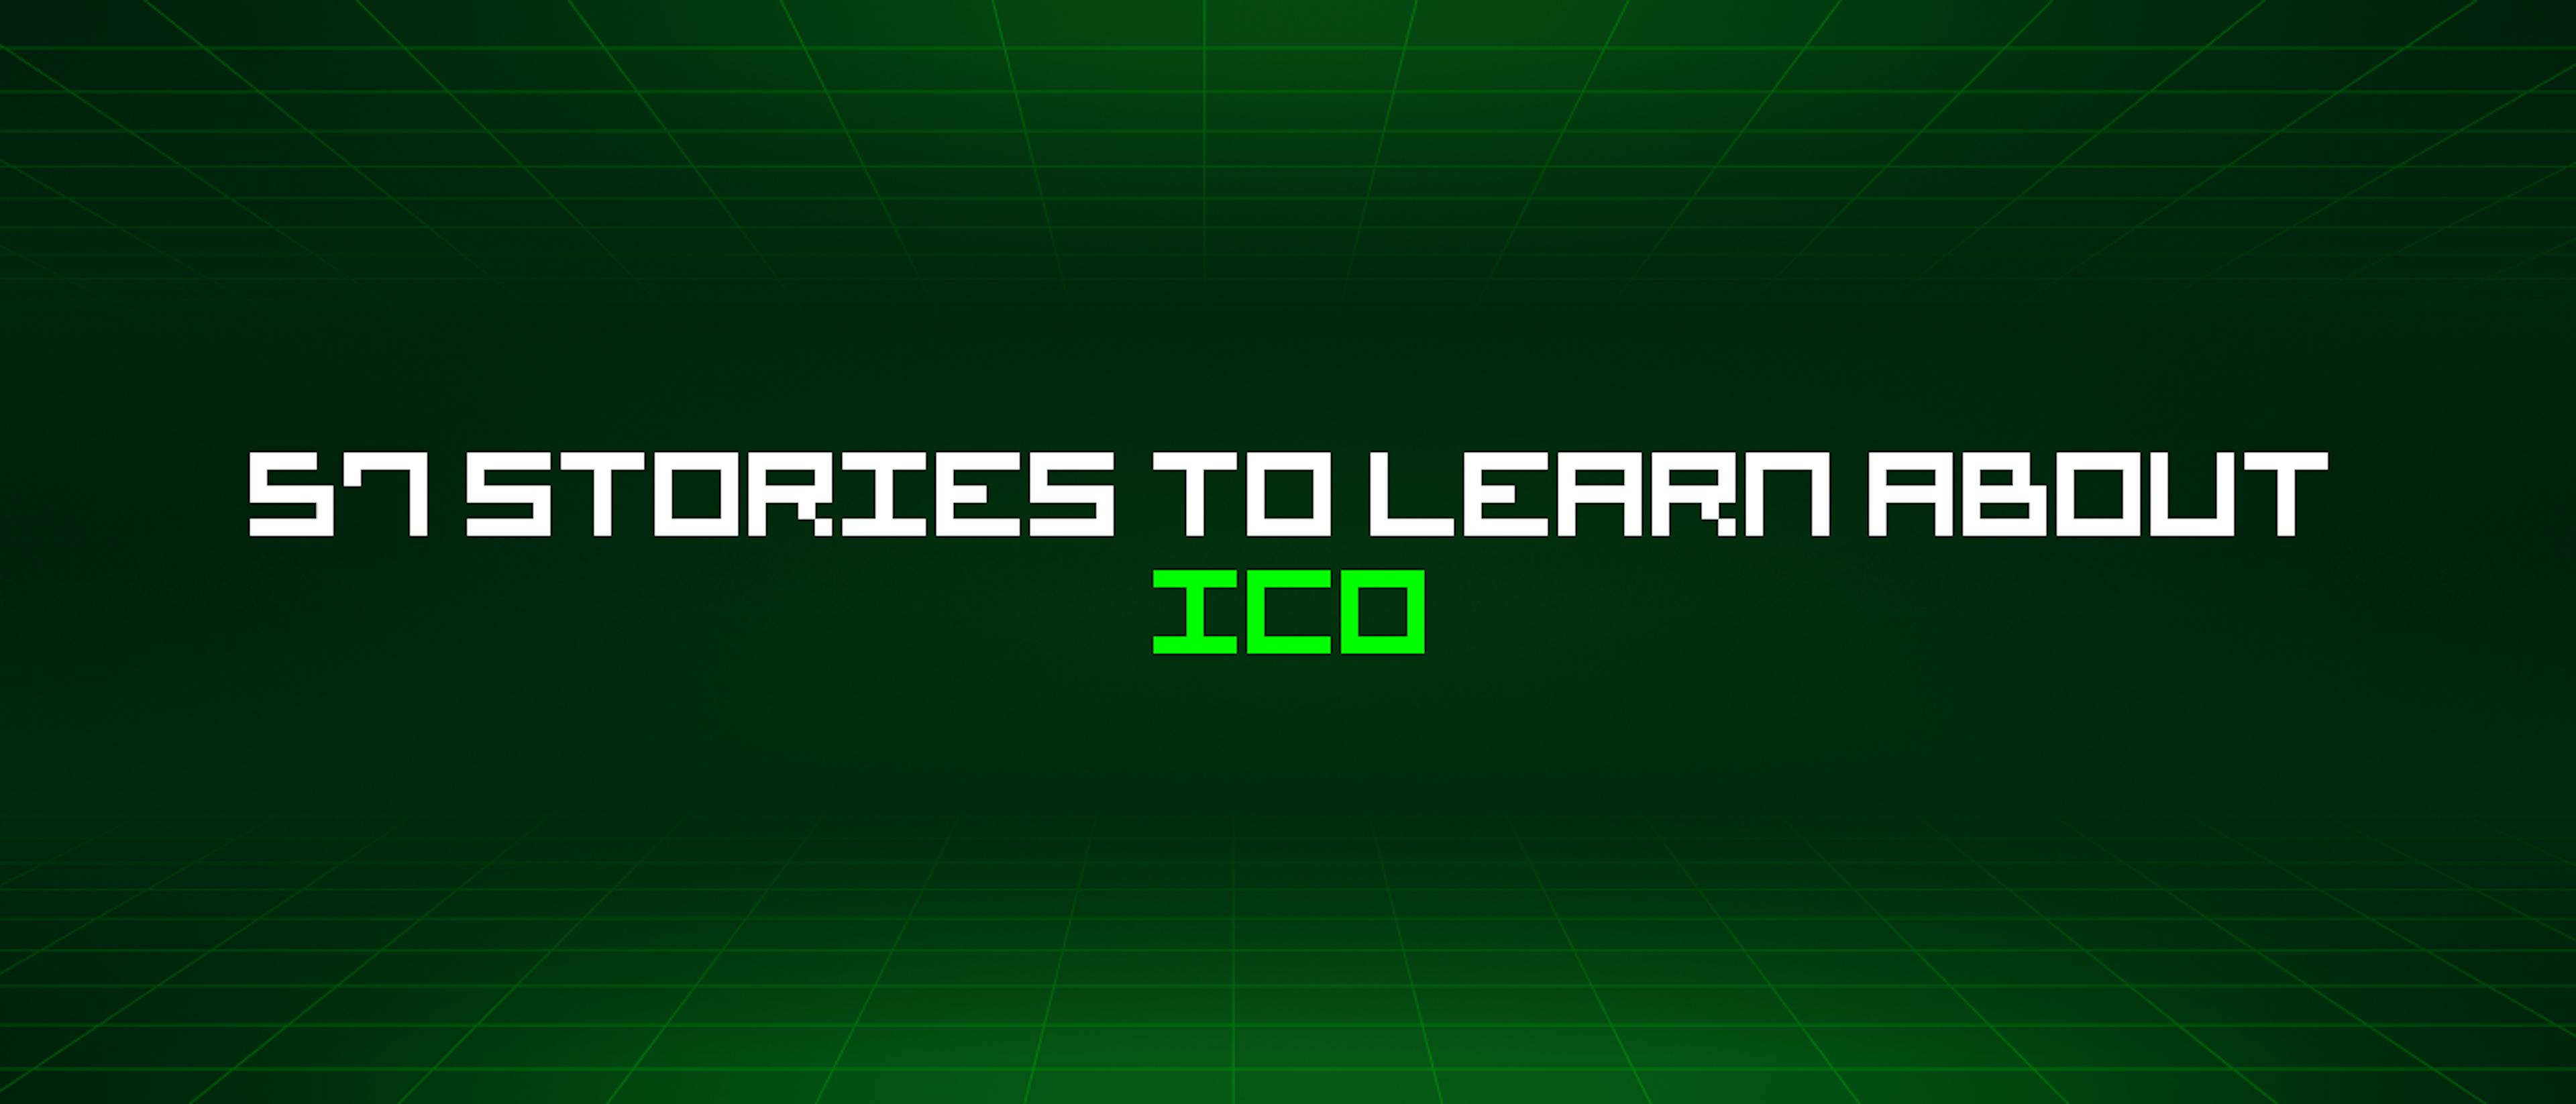 featured image - 57 Stories To Learn About Ico